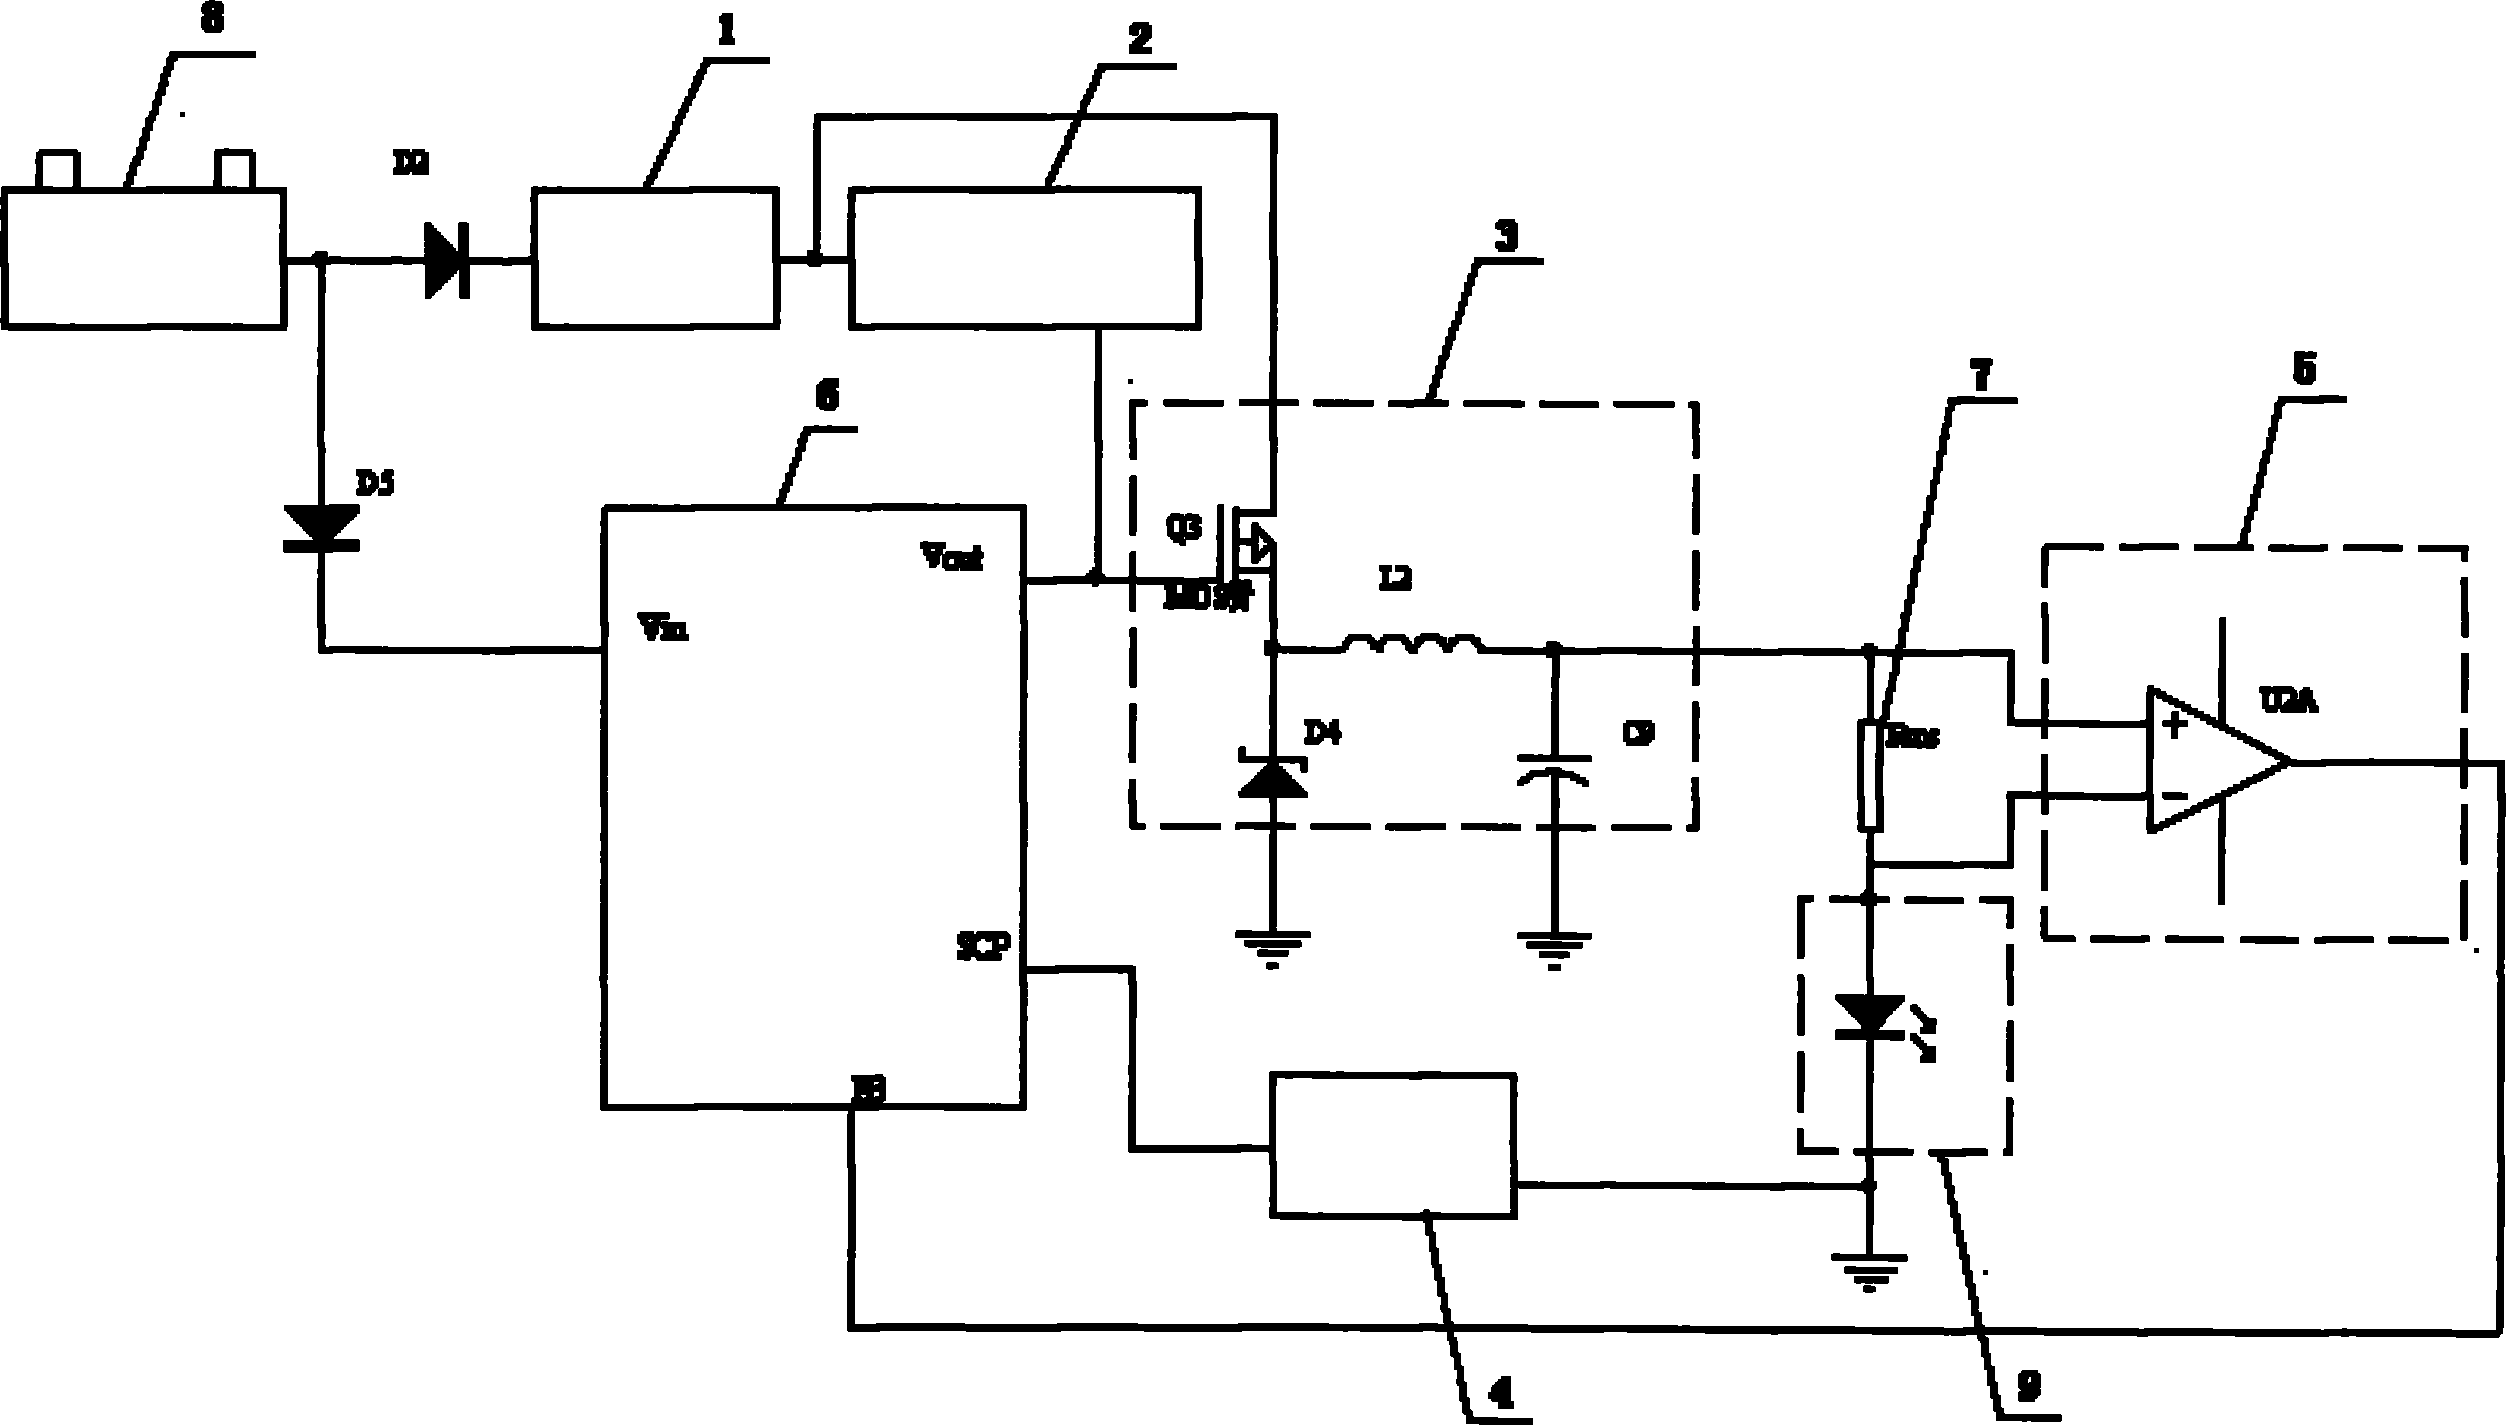 Step-down constant current LED drive circuit for automobile lighting